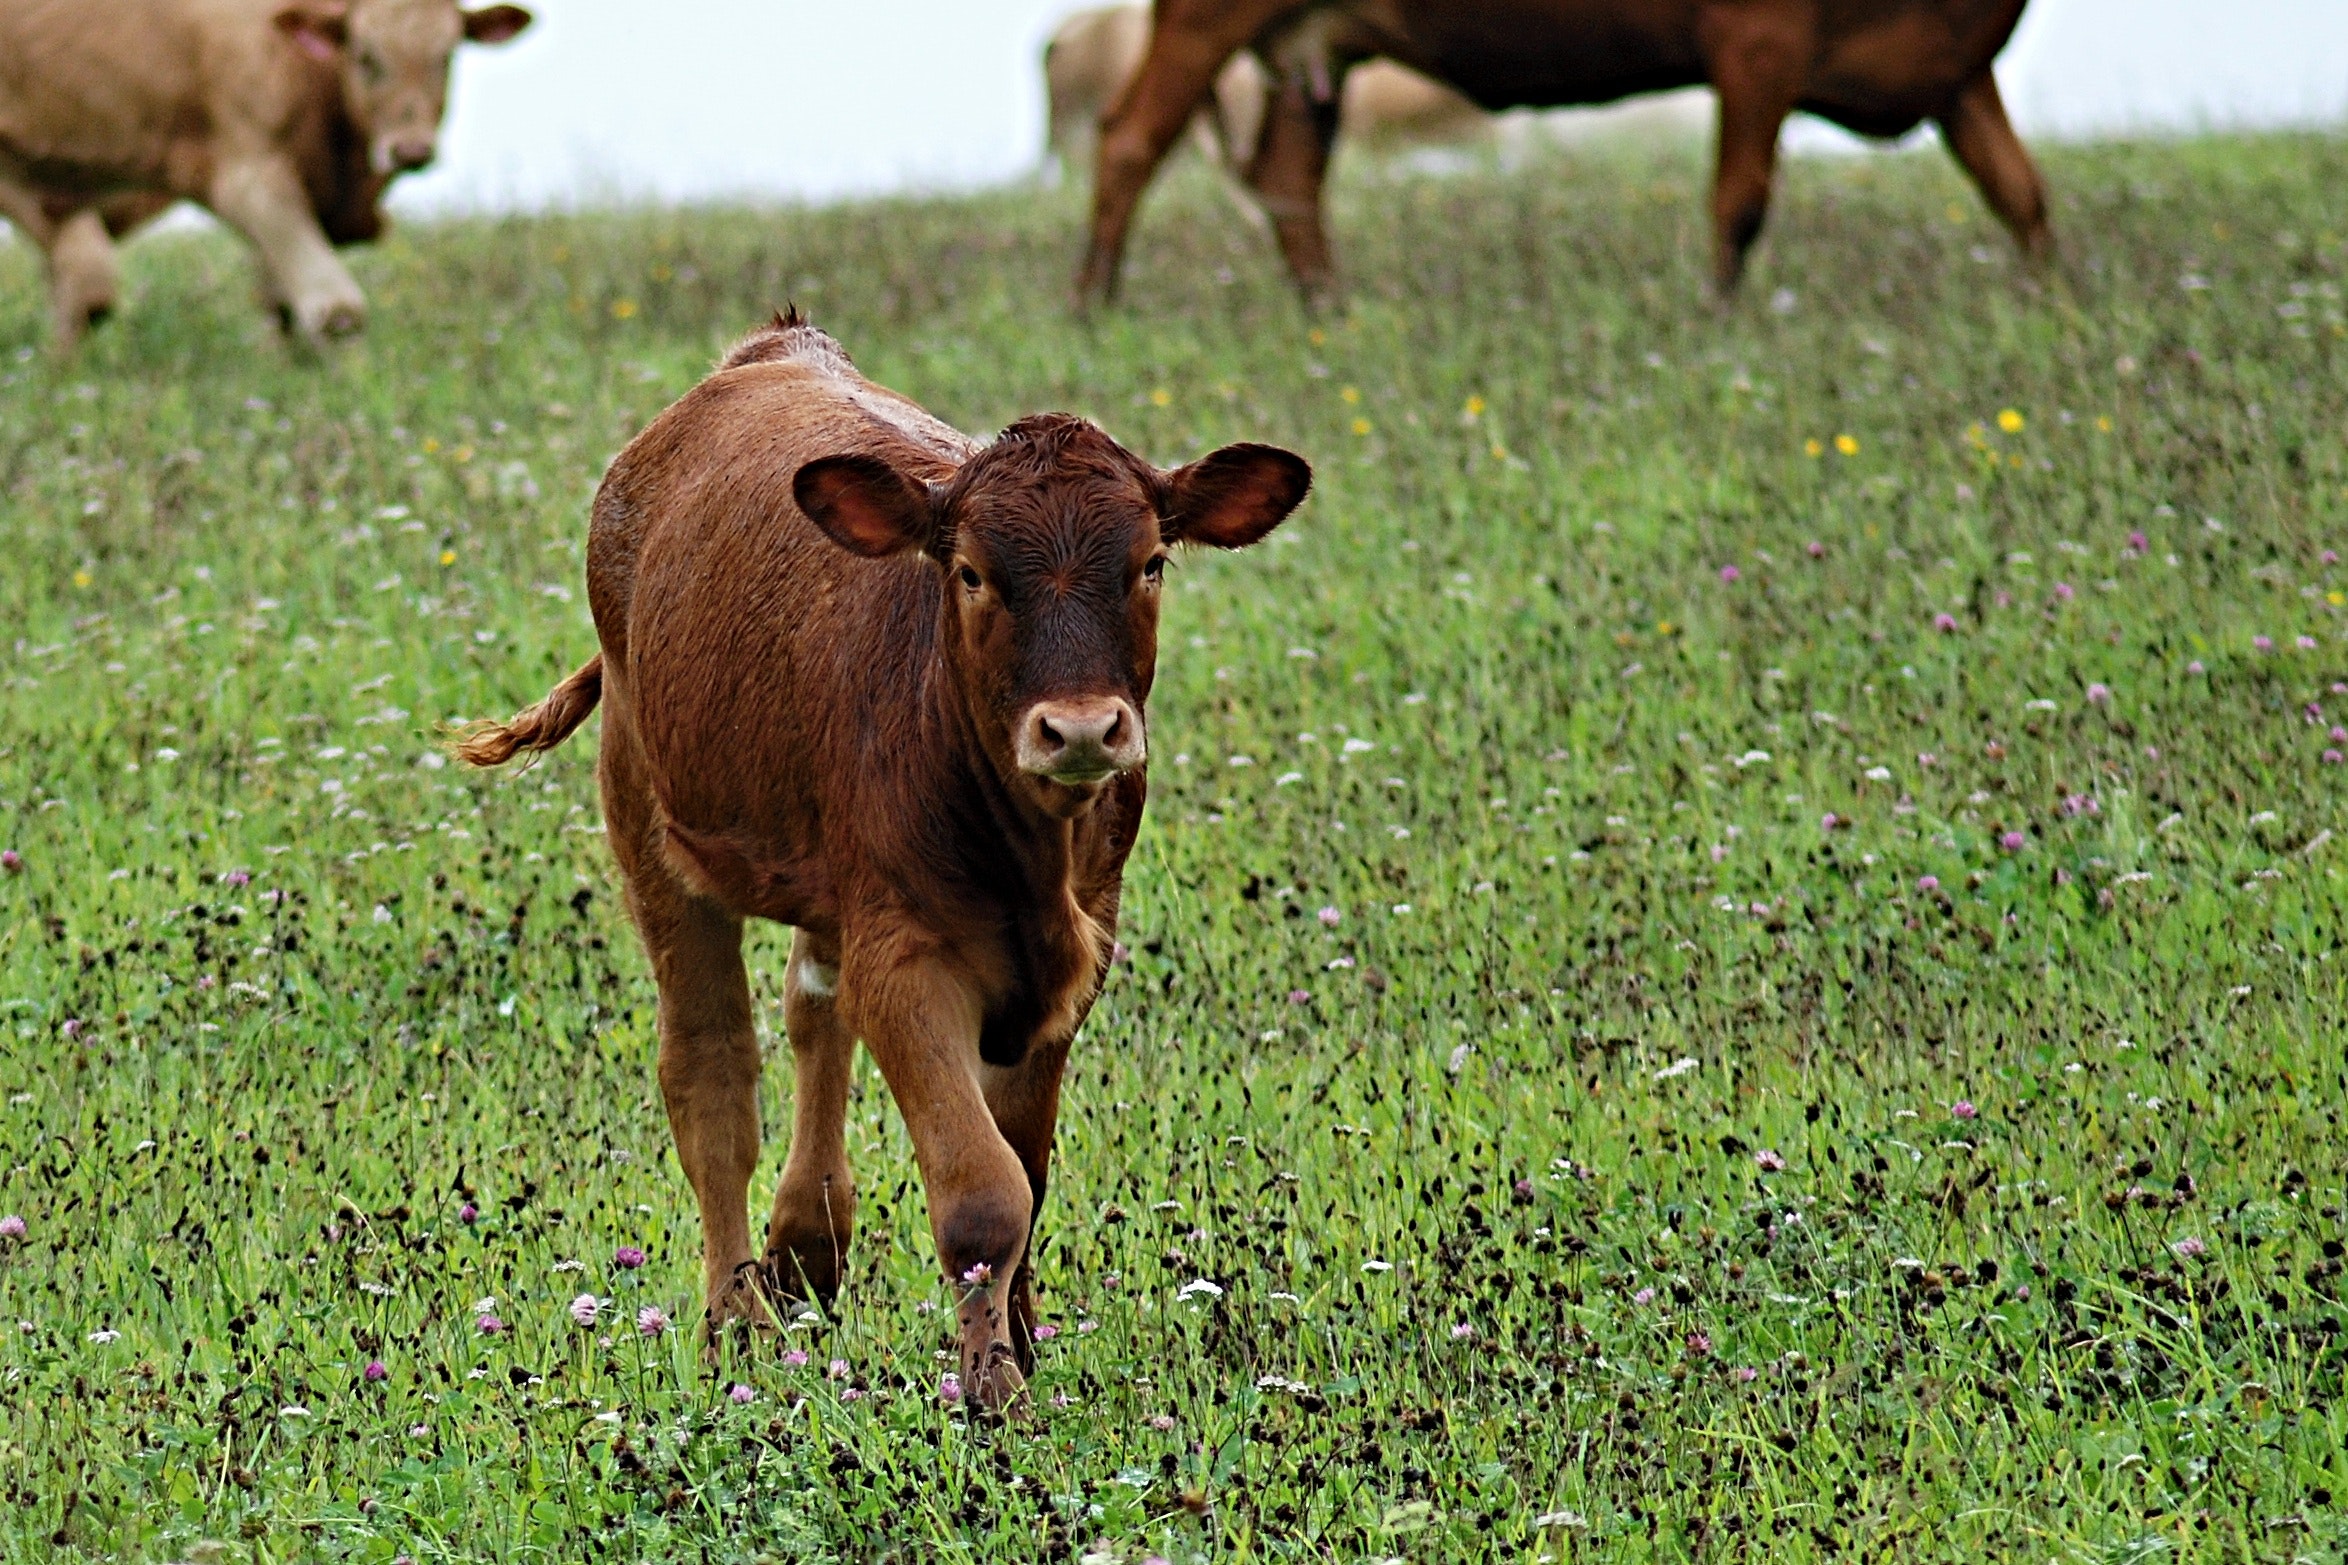 Brown cow in green leaf grass during daytime photo